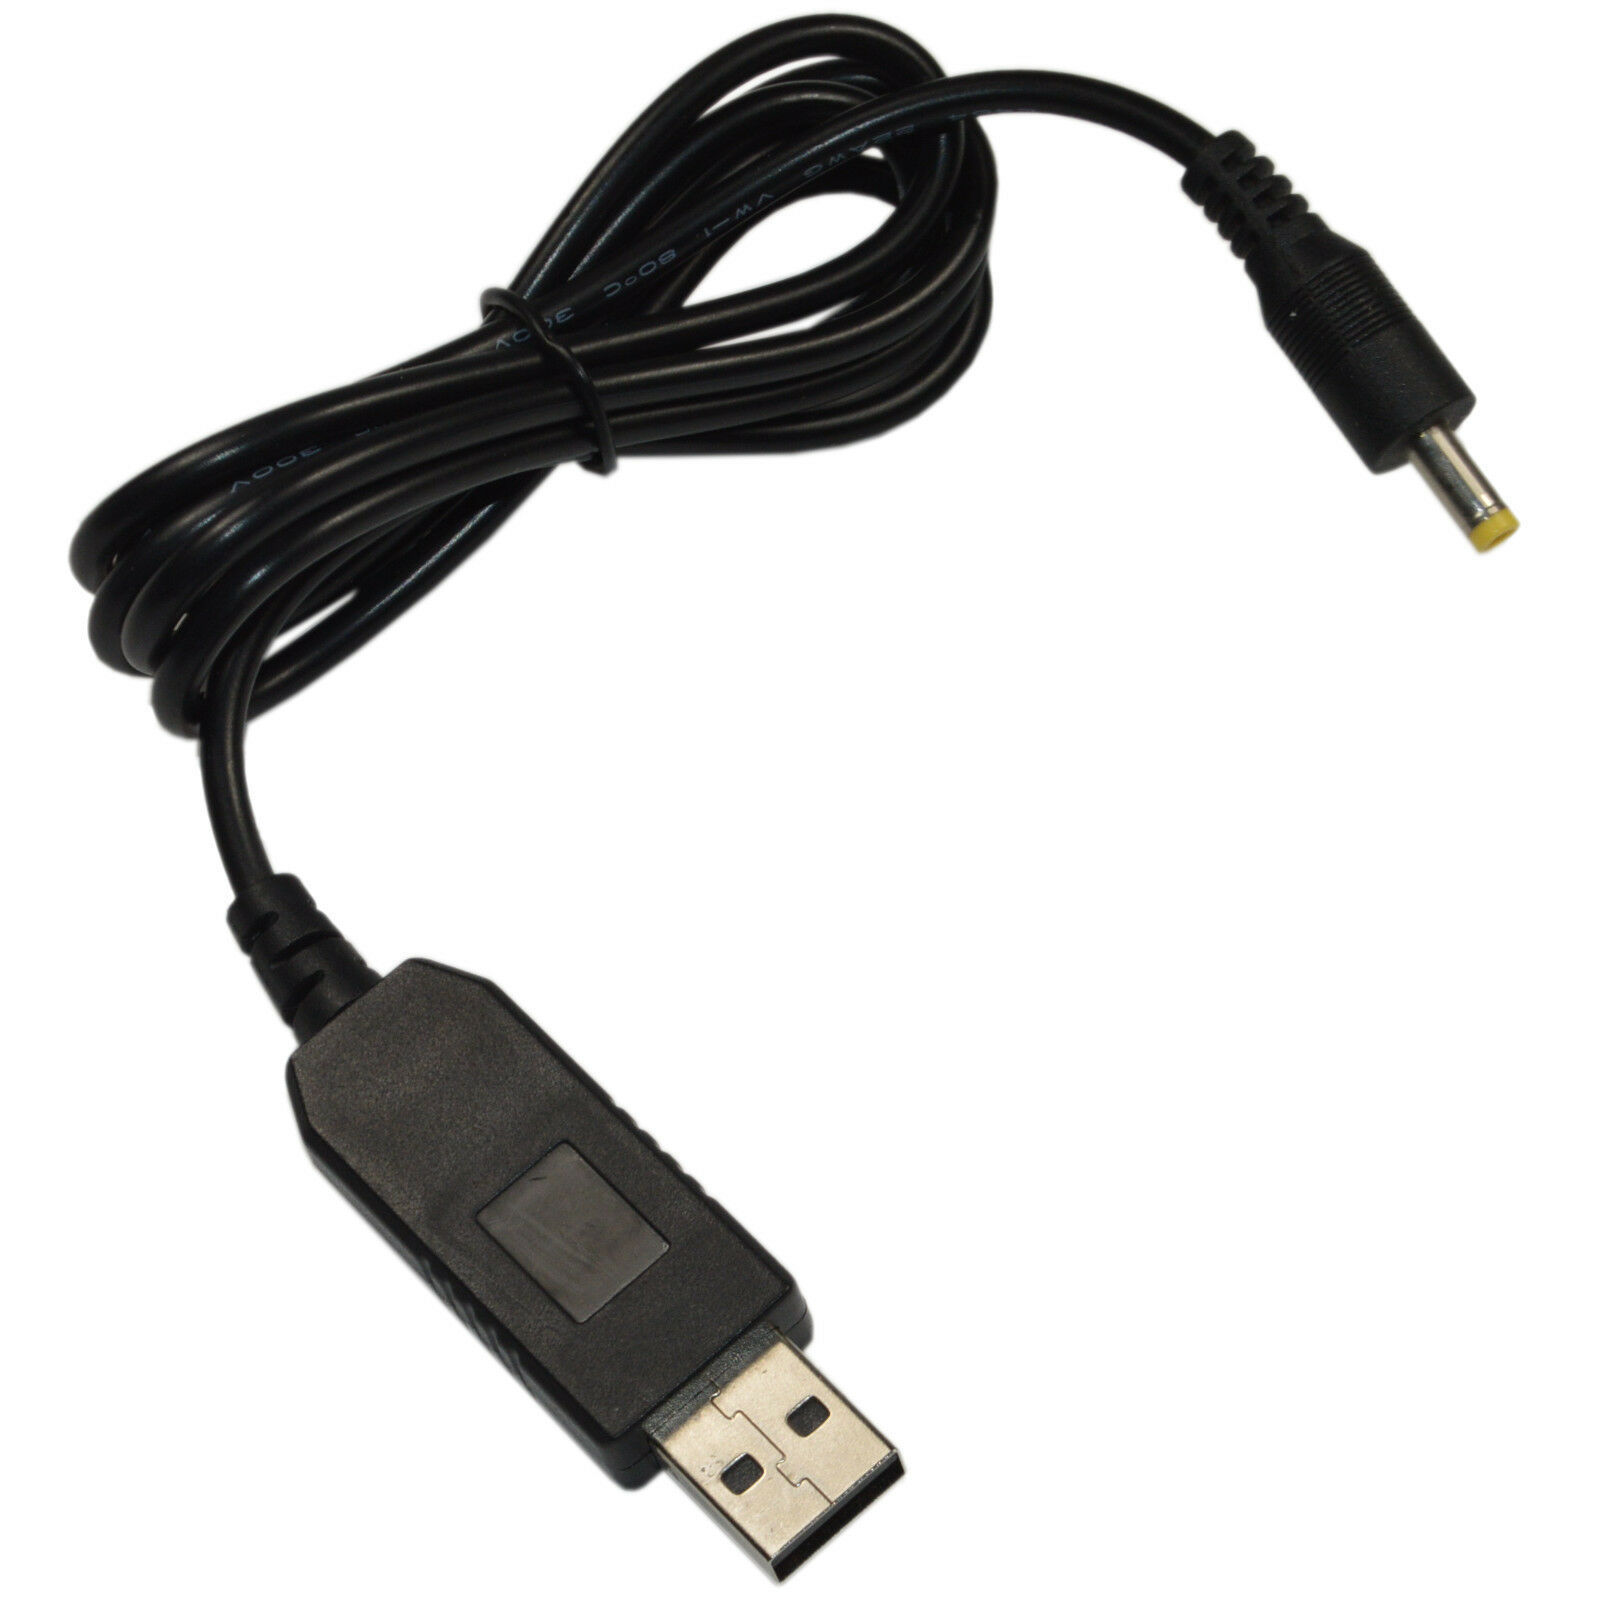 HQRP USB Adapter Cable for Omron Healthcare 5 7 10 Series Blood Pressure Monitor - $5.45